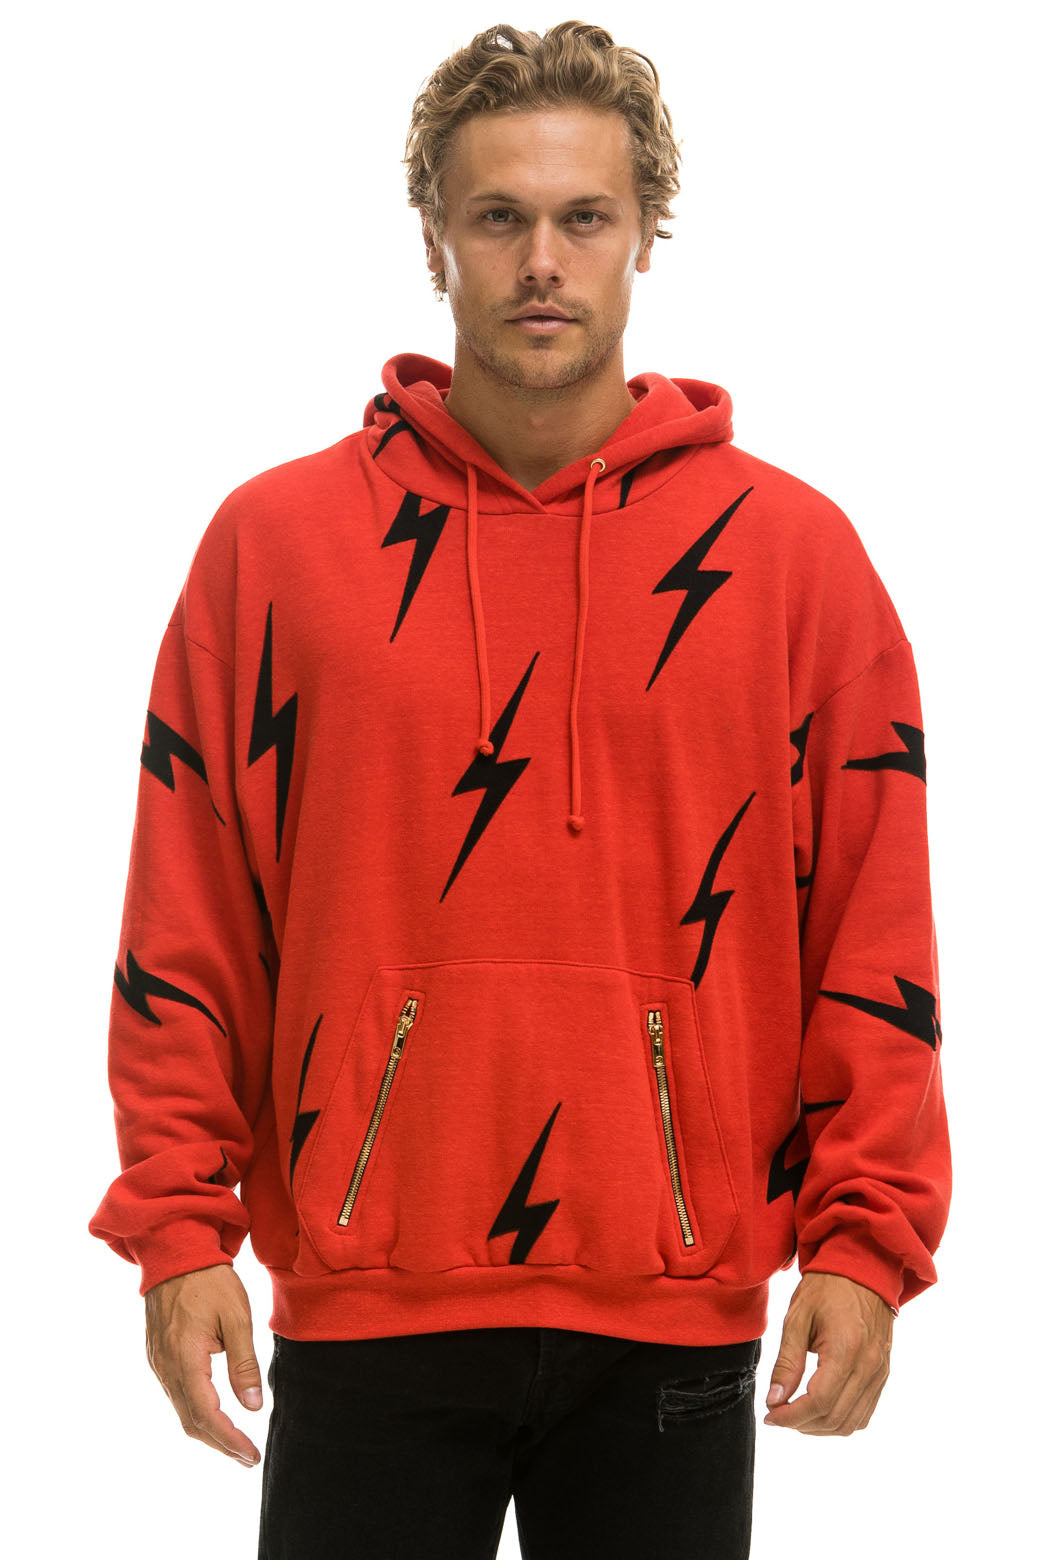 BOLT STITCH REPEAT RELAXED PULLOVER HOODIE WITH POCKET ZIPPERS - RED // BLACK Hoodie Aviator Nation 